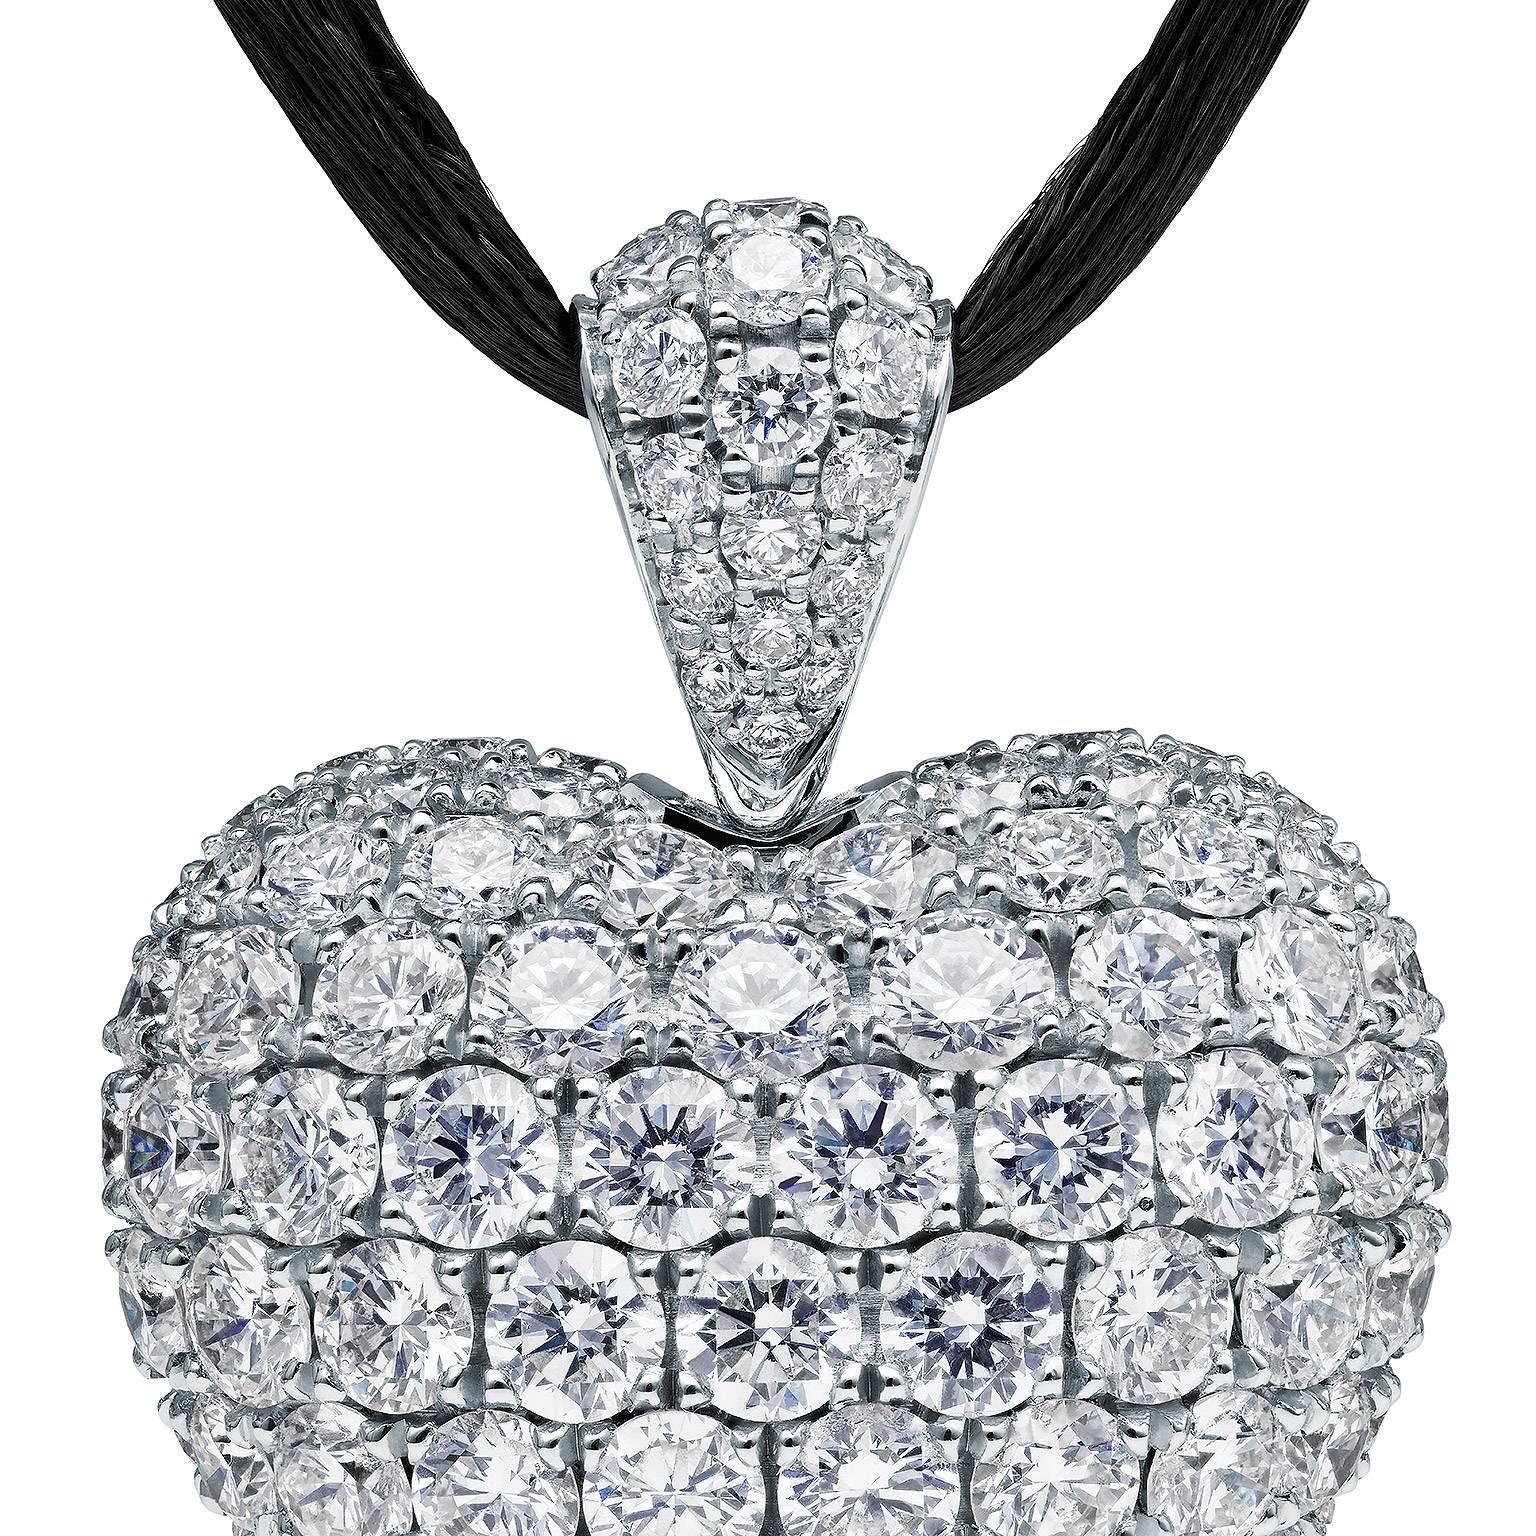 This magnificent diamond and 18 Karat white gold heart pendant designed by Towe Norlen in 2010, is shaped as a perfectly curved heart with a prominently rounded body. It has 179 hand set Top Wesselton (TW vvs) high quality diamonds. In total 7.55